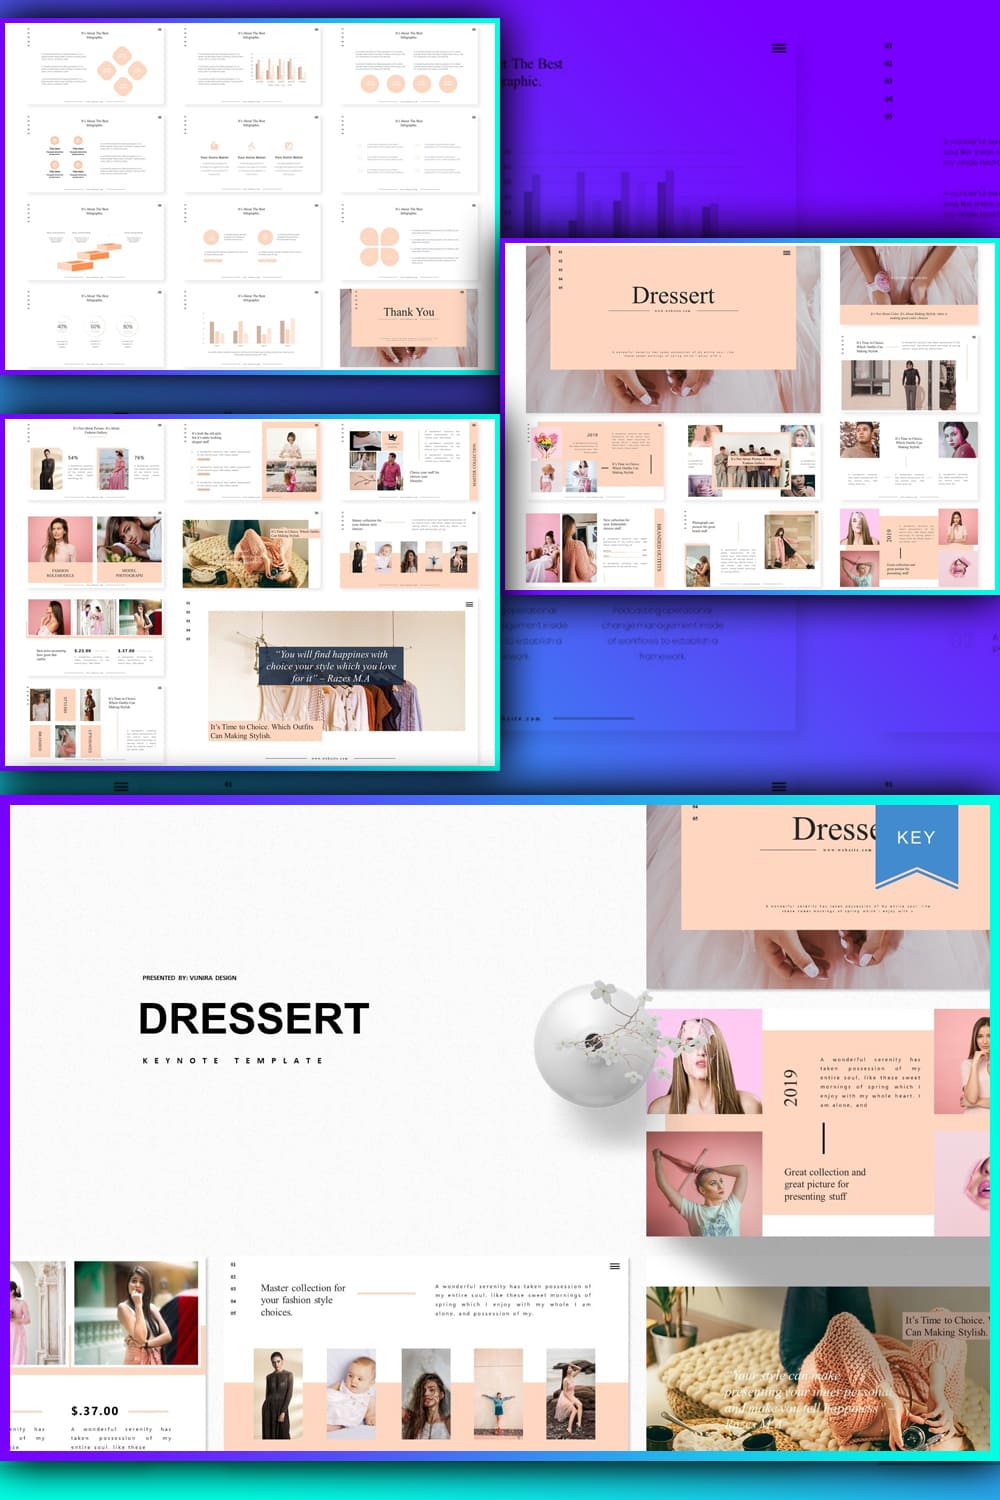 Inscription “Master collection for your fashion style choices” of Dressert Keynote Template.